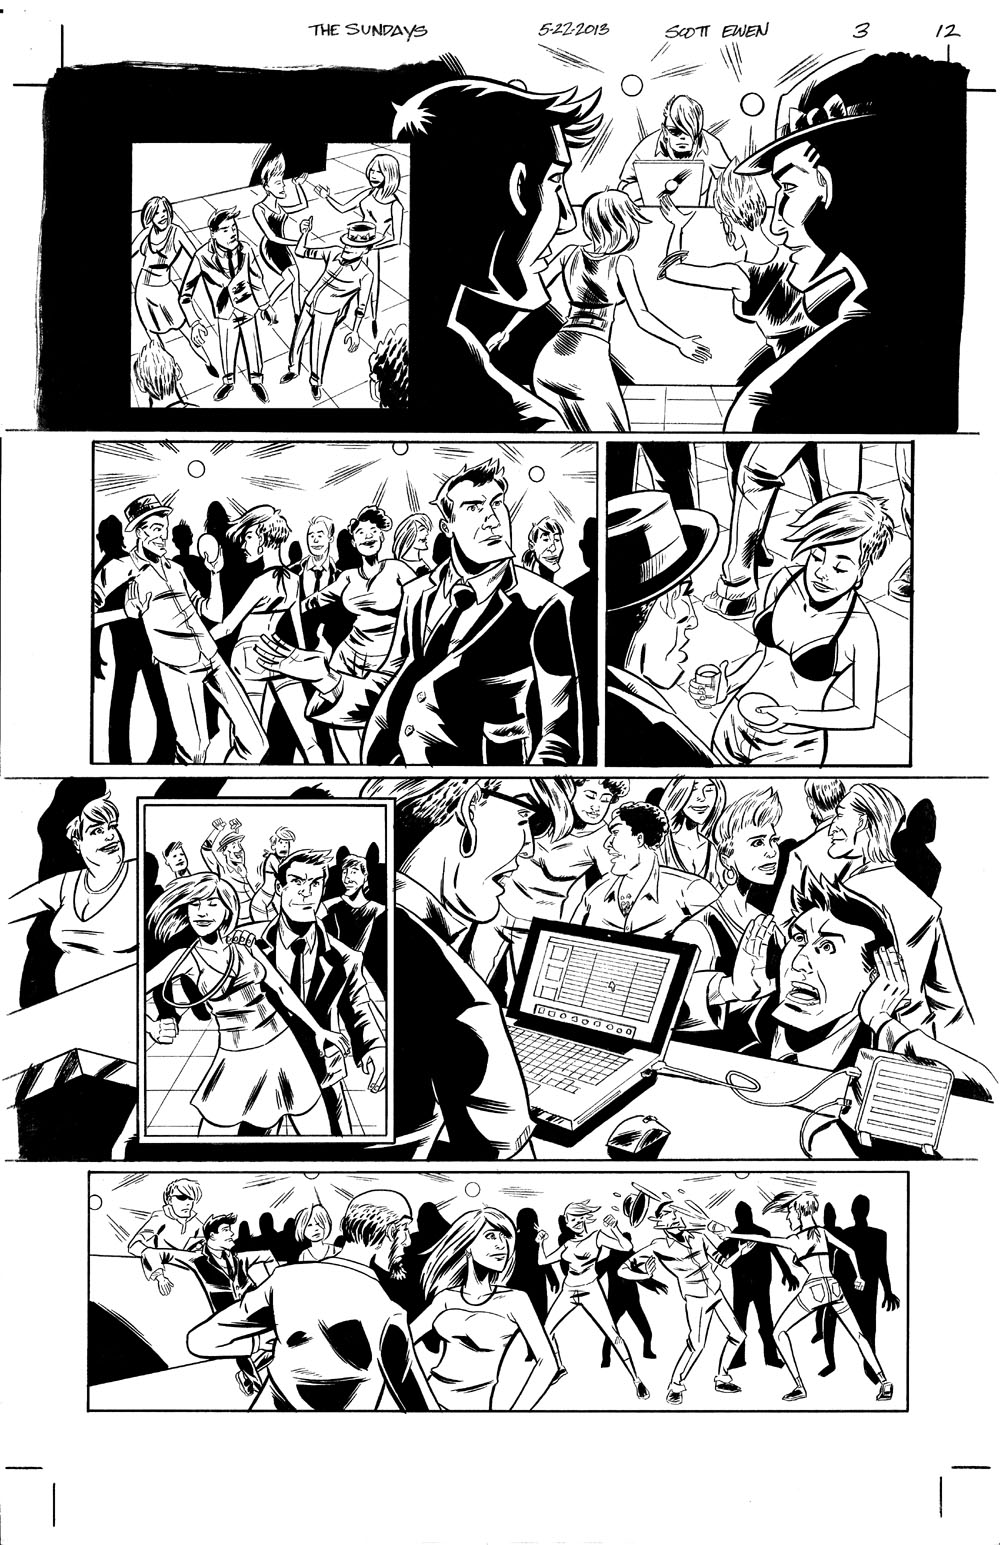 the_sundays__3_page_12_inks_by_scottewen-d66l15x.jpg